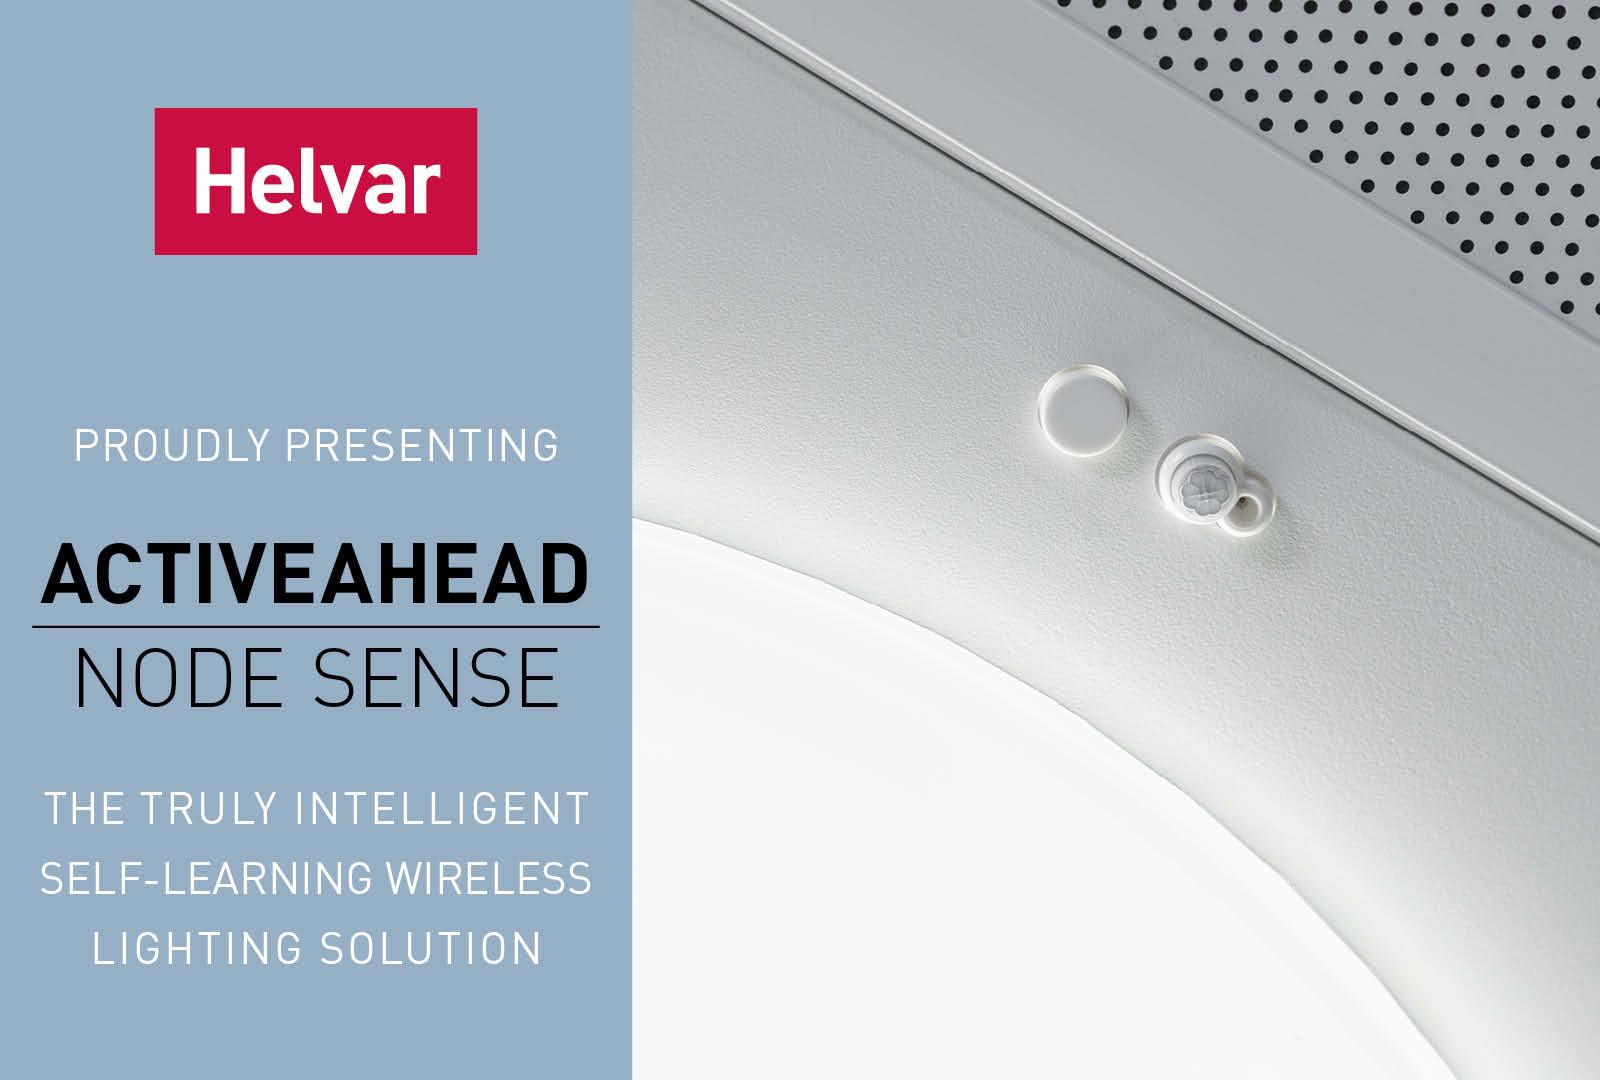 Helvar launches ActiveAhead Node Sense - the smallest lighting sensor with inbuilt wireless connectivity in the market!